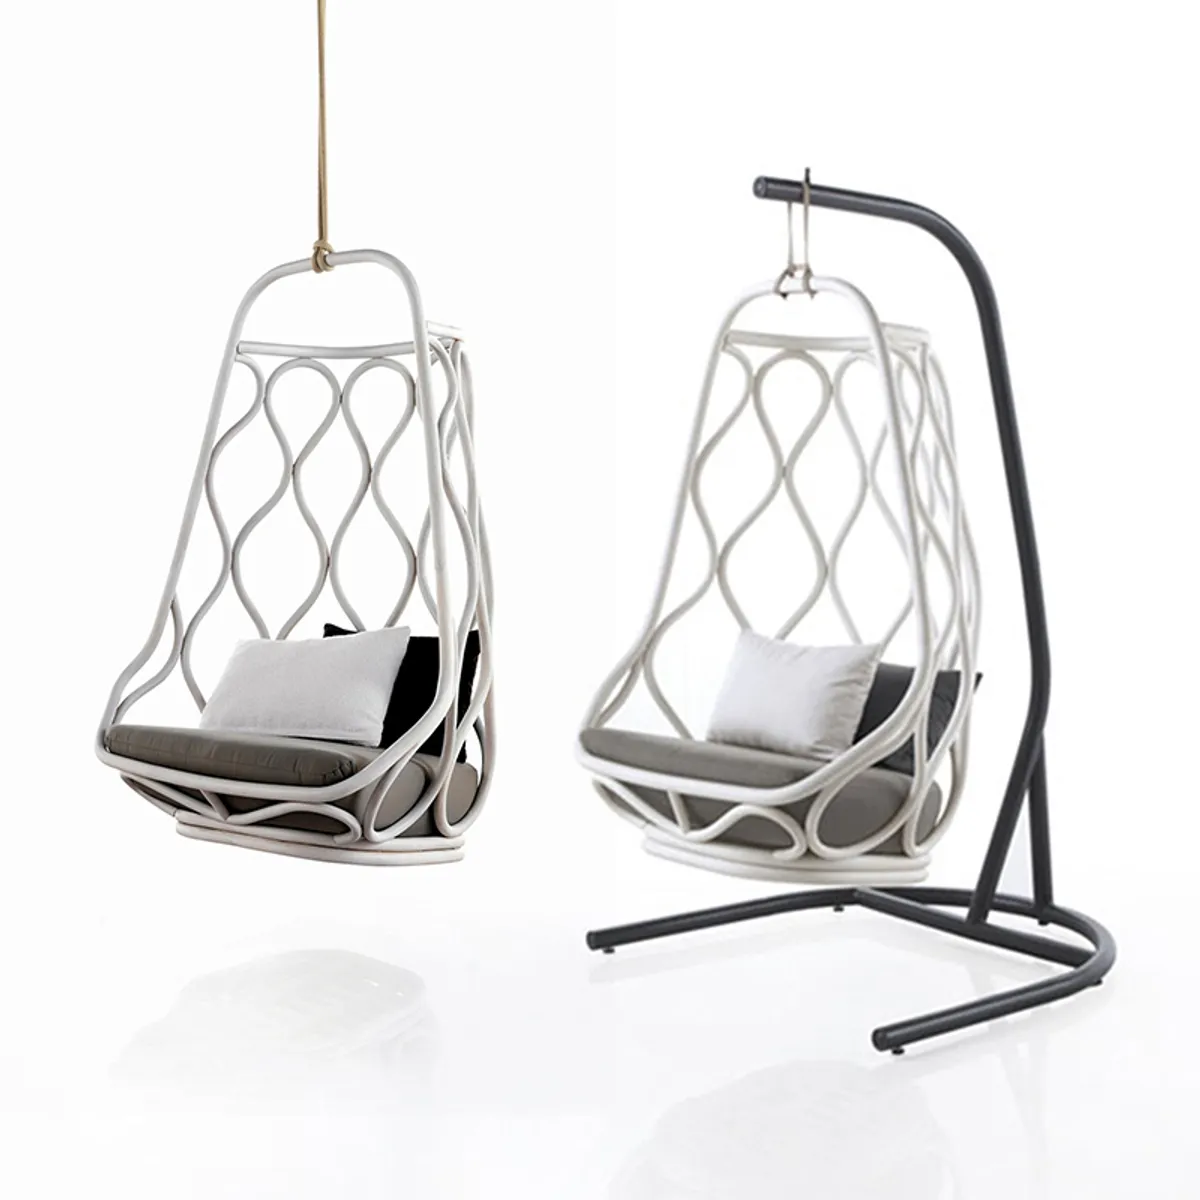 Wave Swing Chair With Base Statement Hotel Furniture Inside Out Contracts 5